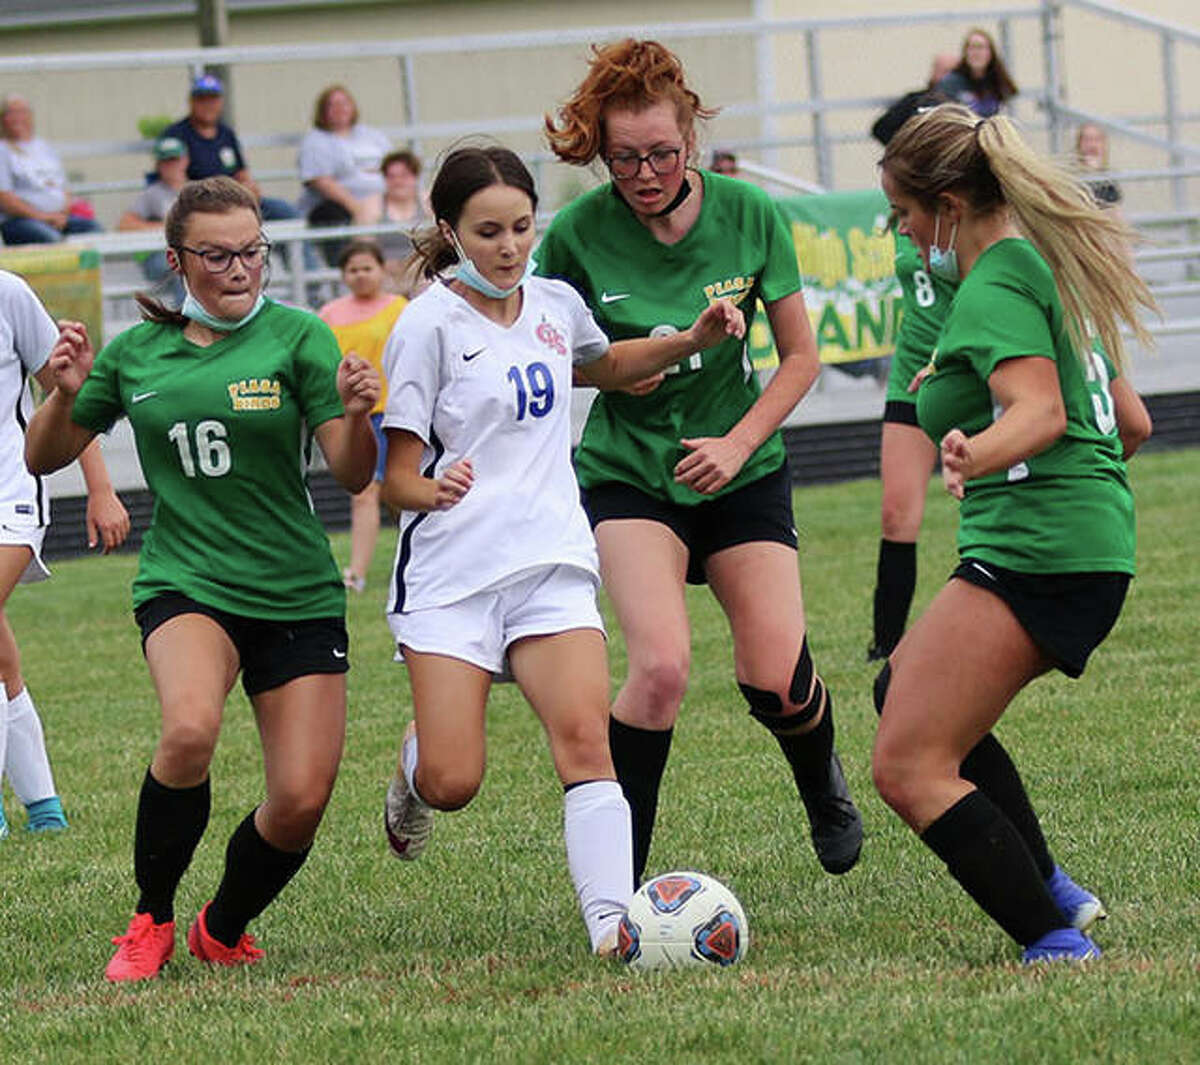 Carlinville’s Annabelle Hulin (19) scored twice Friday and held the Cavies to a 4-3 South Central Conference win over Litchfield. She is shown in action earlier this season against Southwestern.  